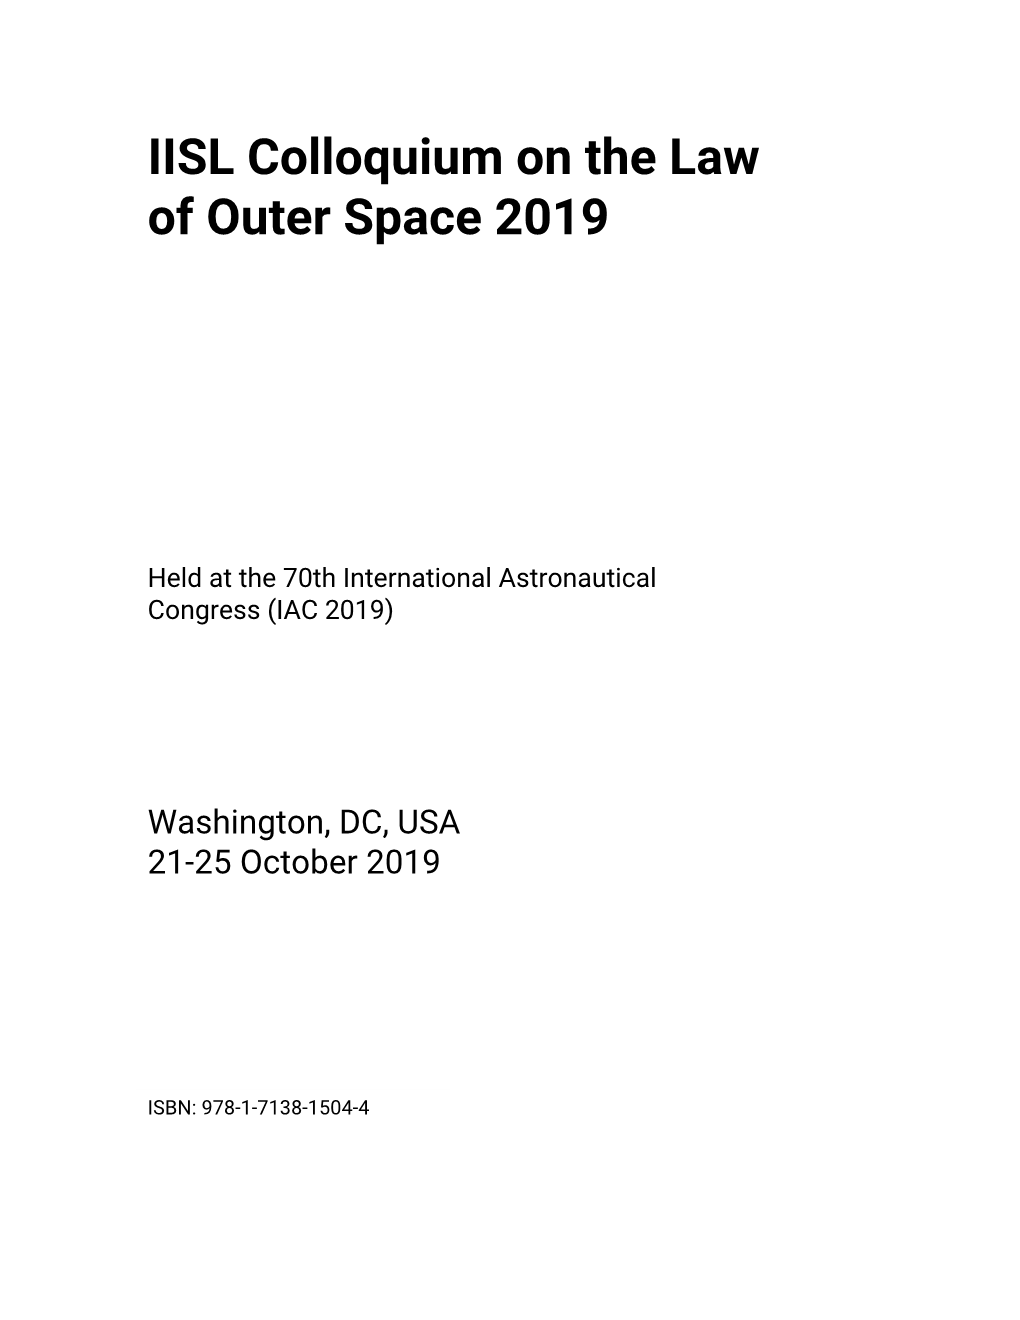 IISL Colloquium on the Law of Outer Space 2019